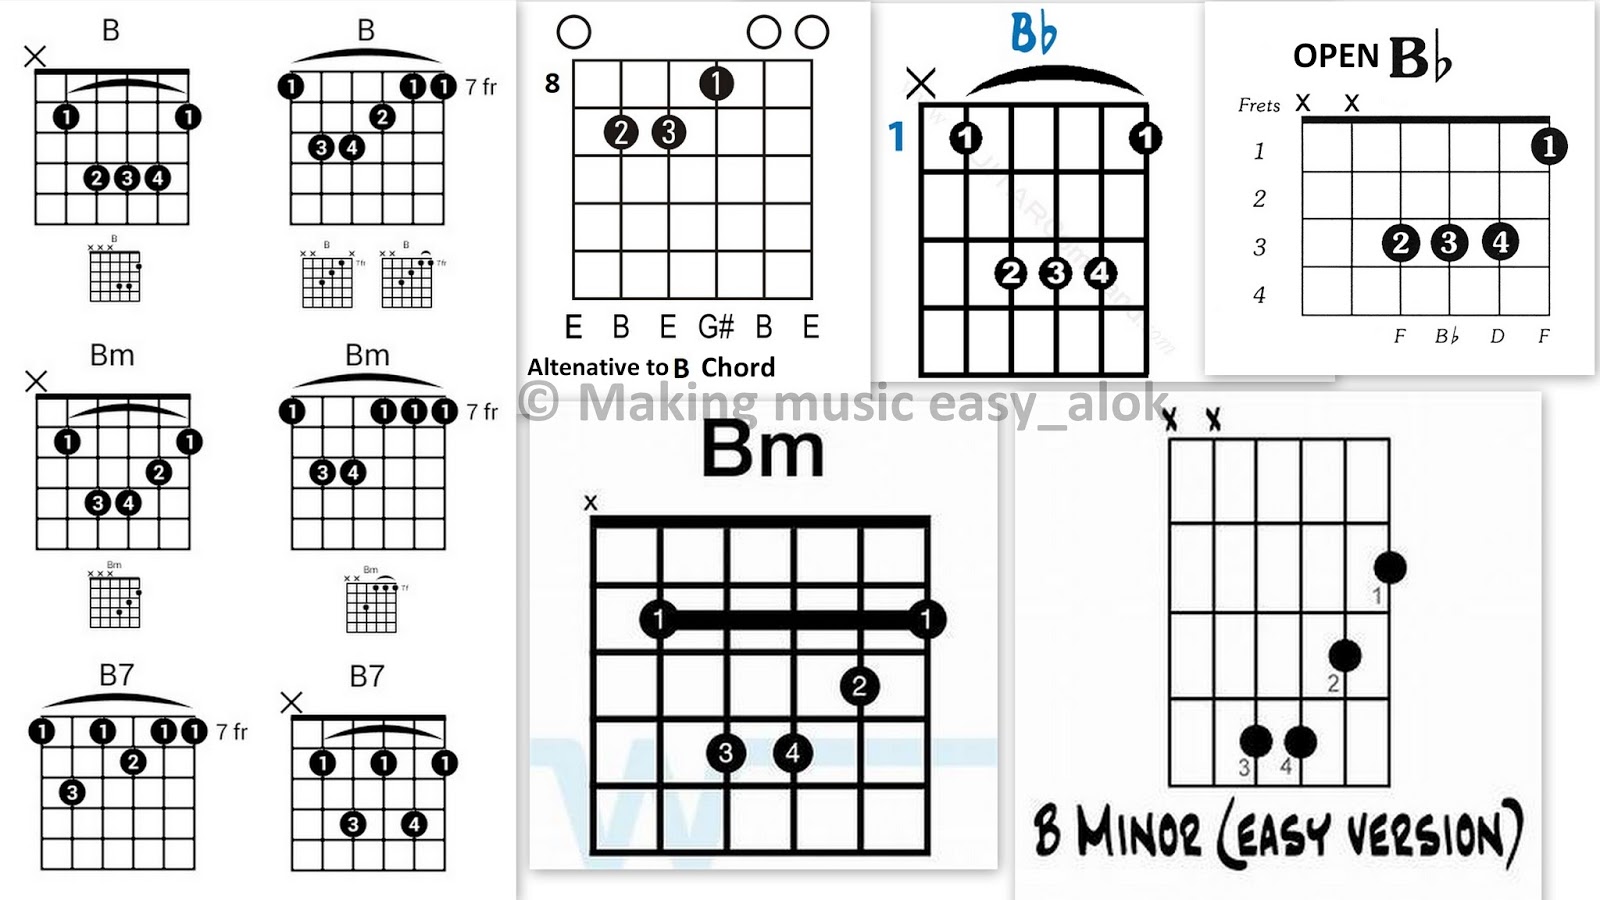 Overview of Guitar Chords and Theory